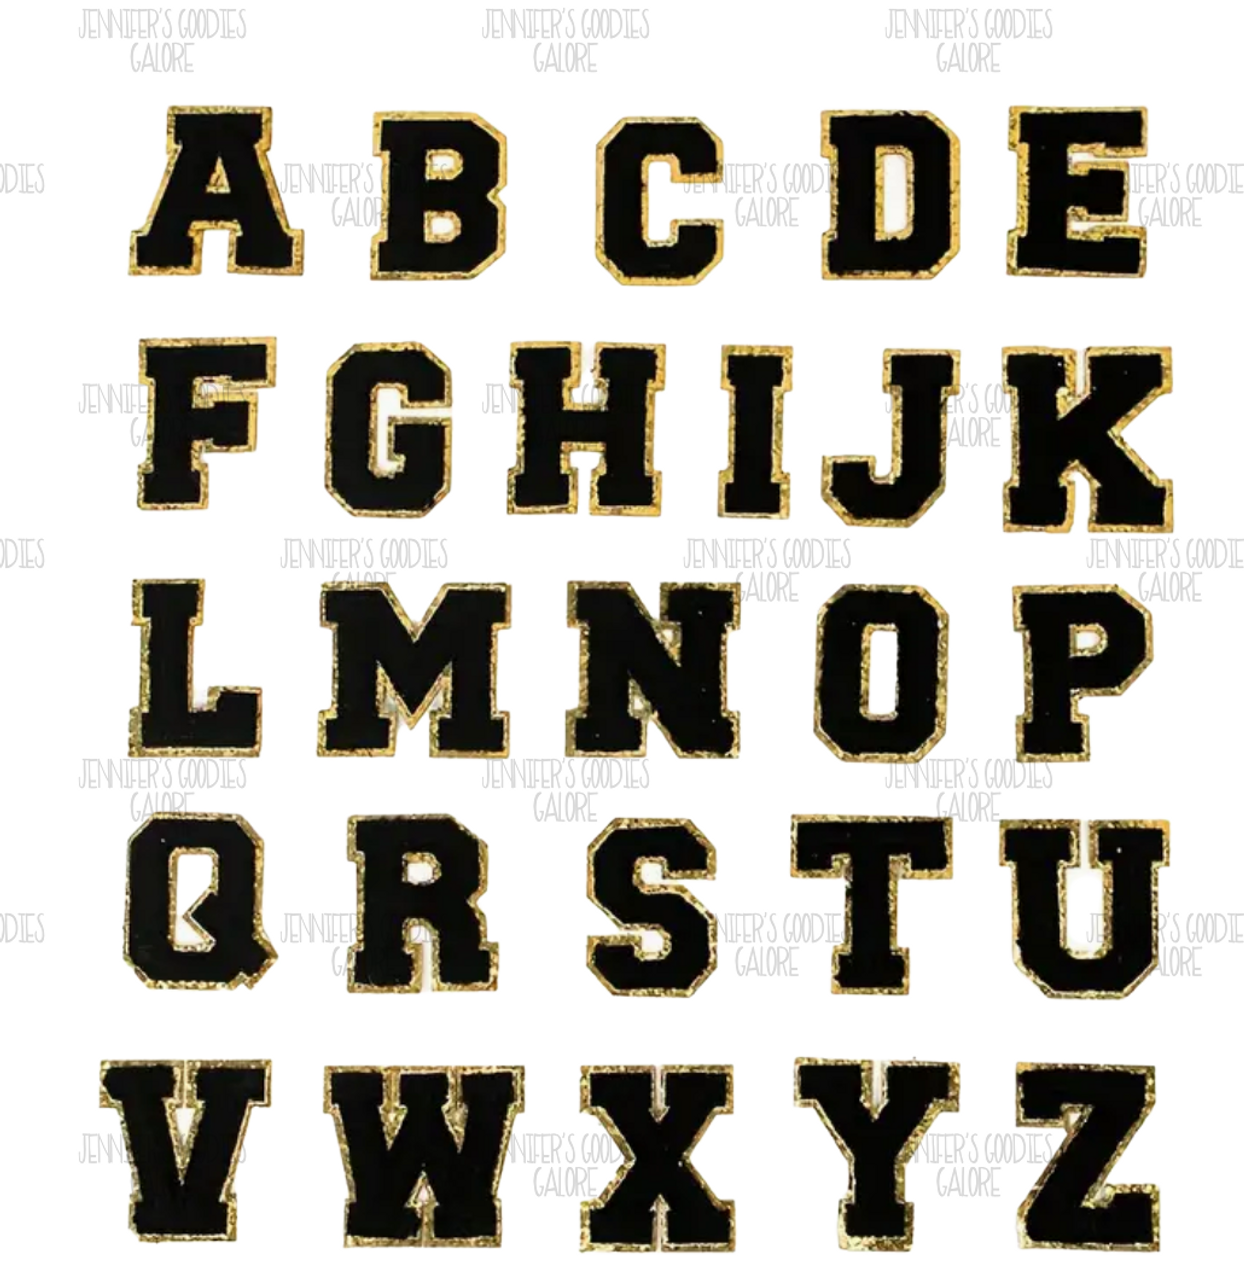 5.5cm, Self-Adhesive Iron On Letters: Chenille Patches, Varsity Letters,  Gold Glitter, PINK Letter Patches Stickers for Clothing, Jackets,  Backpacks, Hats Repair & Alphabet Embroidered Applique Preppy Patch, 1  PIECE - Jennifer's Goodies